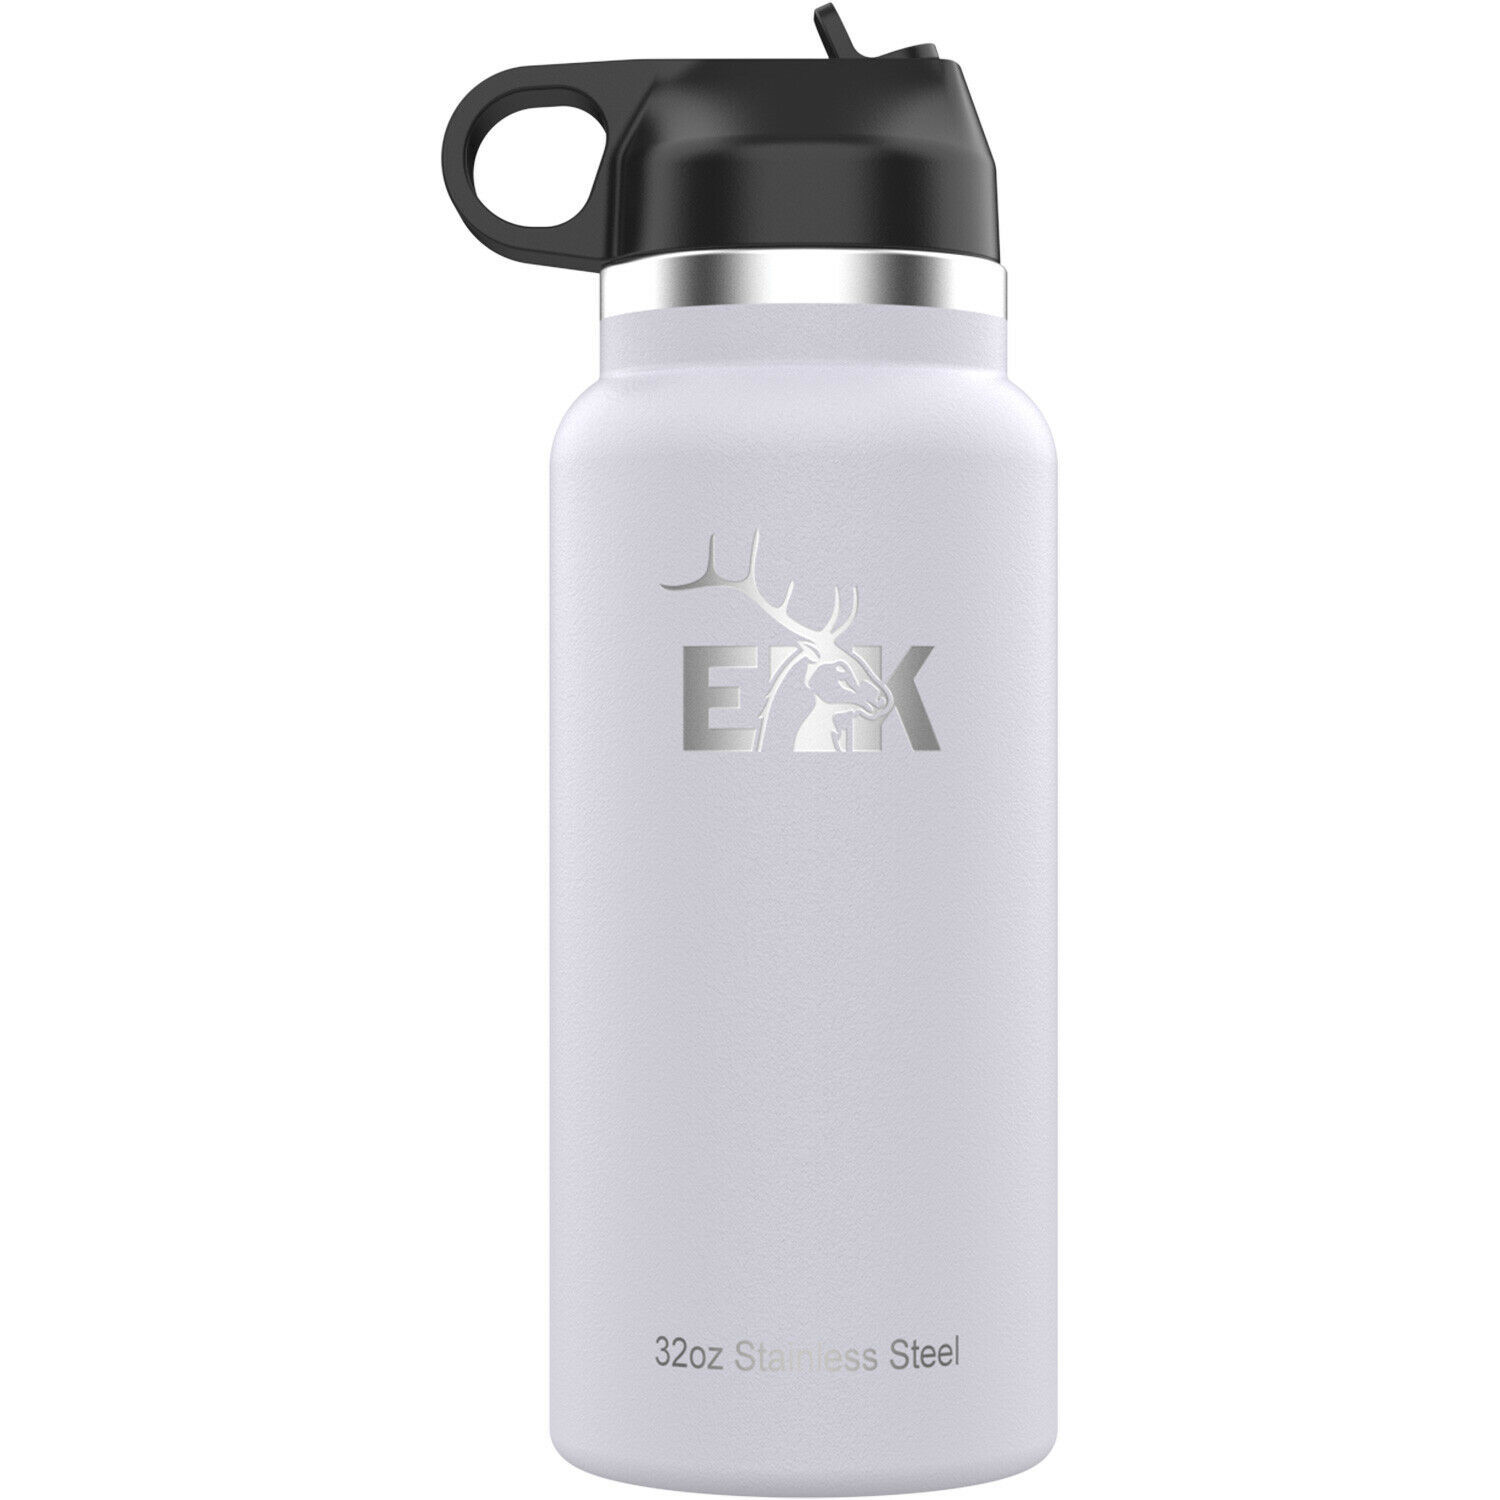 ELK Insulated Water Bottle - Double Wall Stainless Steel - Dishwasher Safe - $19.99